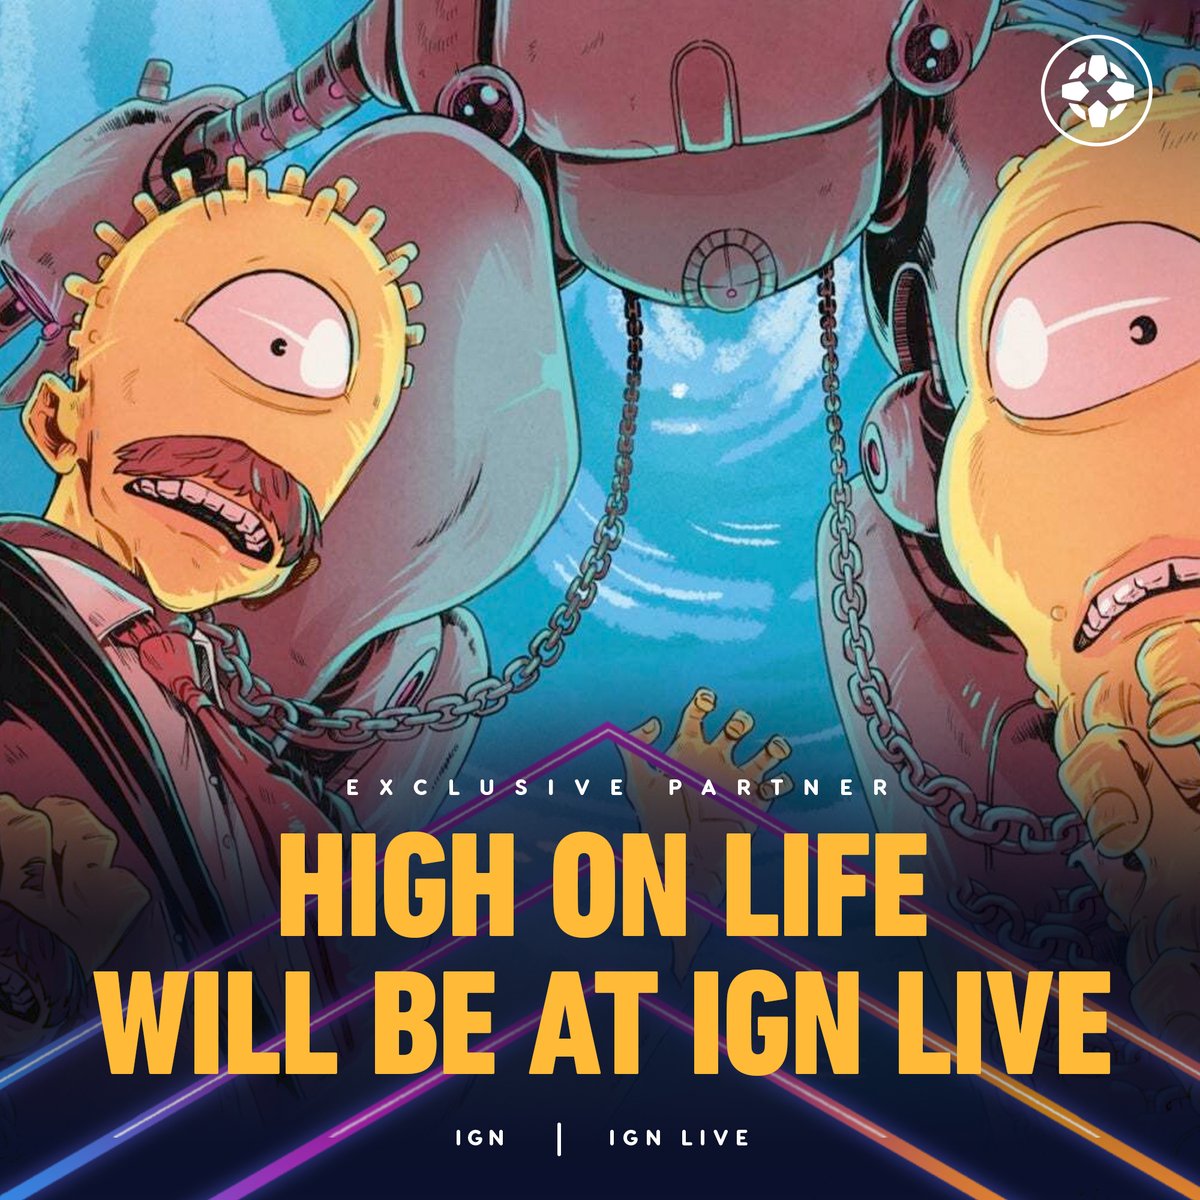 High on Life is coming to #IGNLive! VIP passholders will score an limited edition advance copy of issue #1 of the new High on Life comic and writer Alec Robbins will be doing signings on Saturday, June 8. Head over to IGN.com/live now to grab tickets while they last.